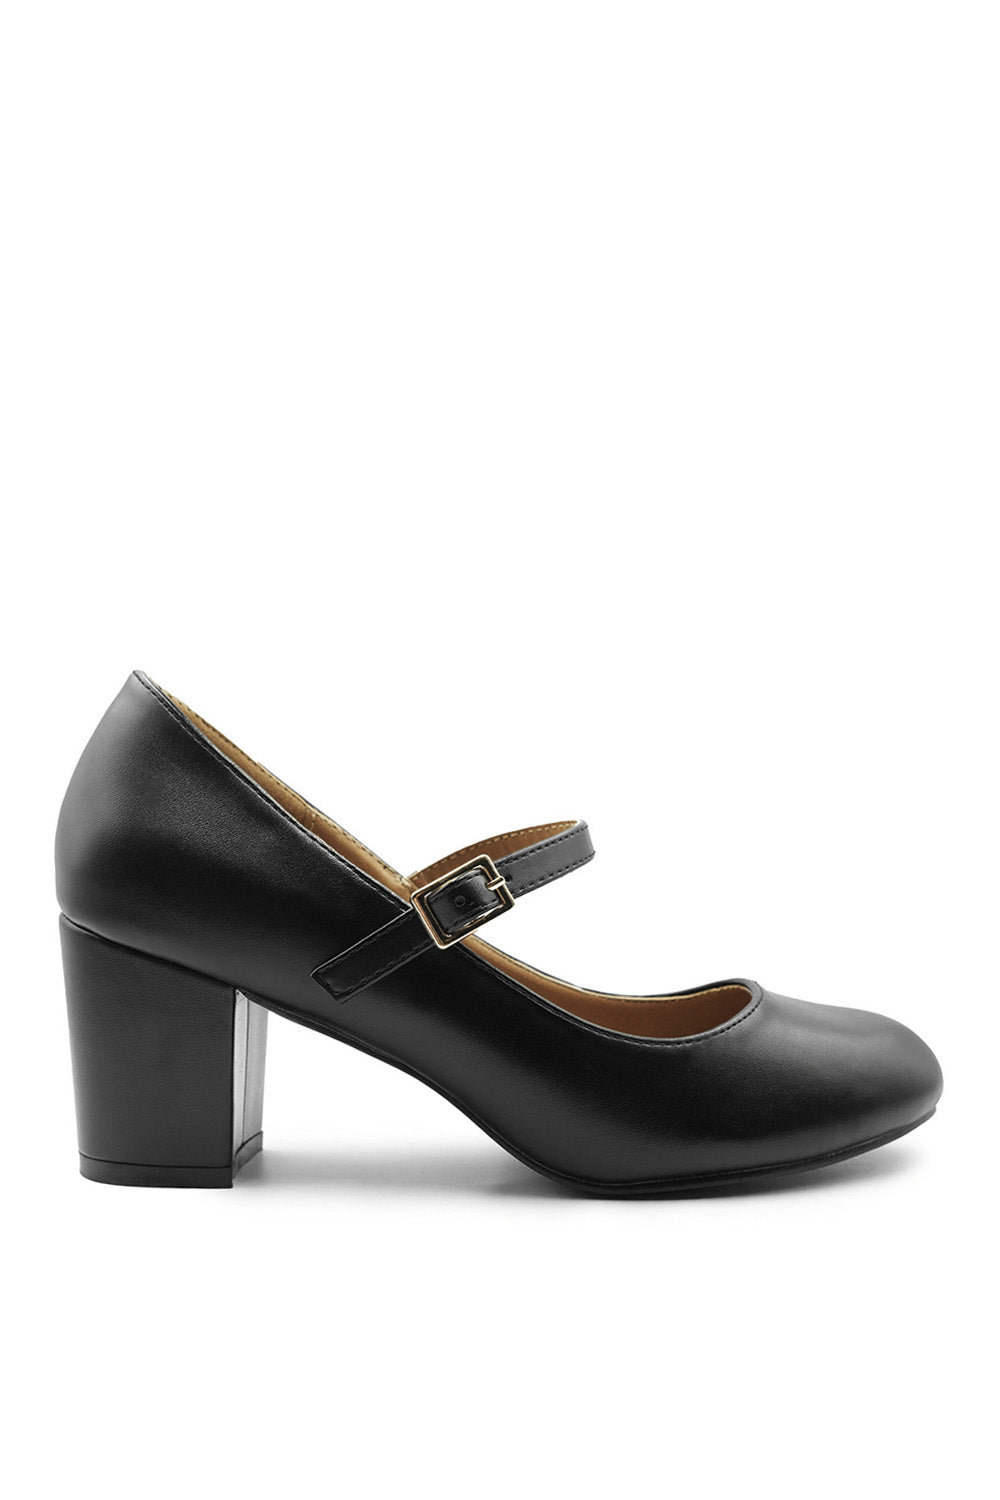 ARACELI EXTRA EXTRA WIDE FIT BLOCK HEEL MARY JANE PUMPS IN BLACK FAUX LEATHER